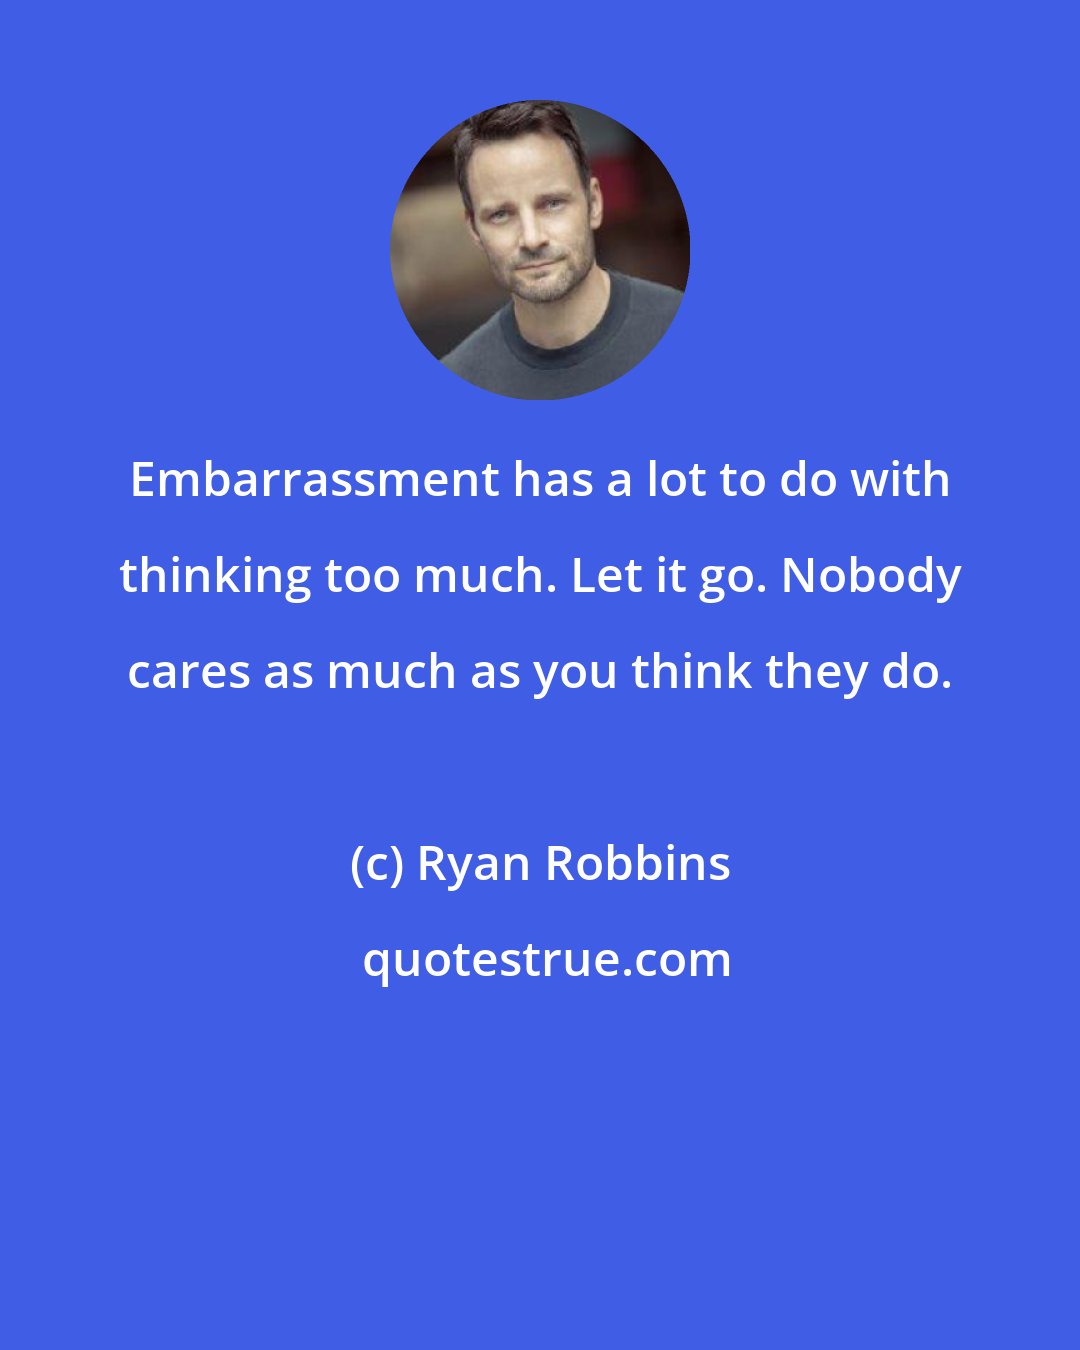 Ryan Robbins: Embarrassment has a lot to do with thinking too much. Let it go. Nobody cares as much as you think they do.